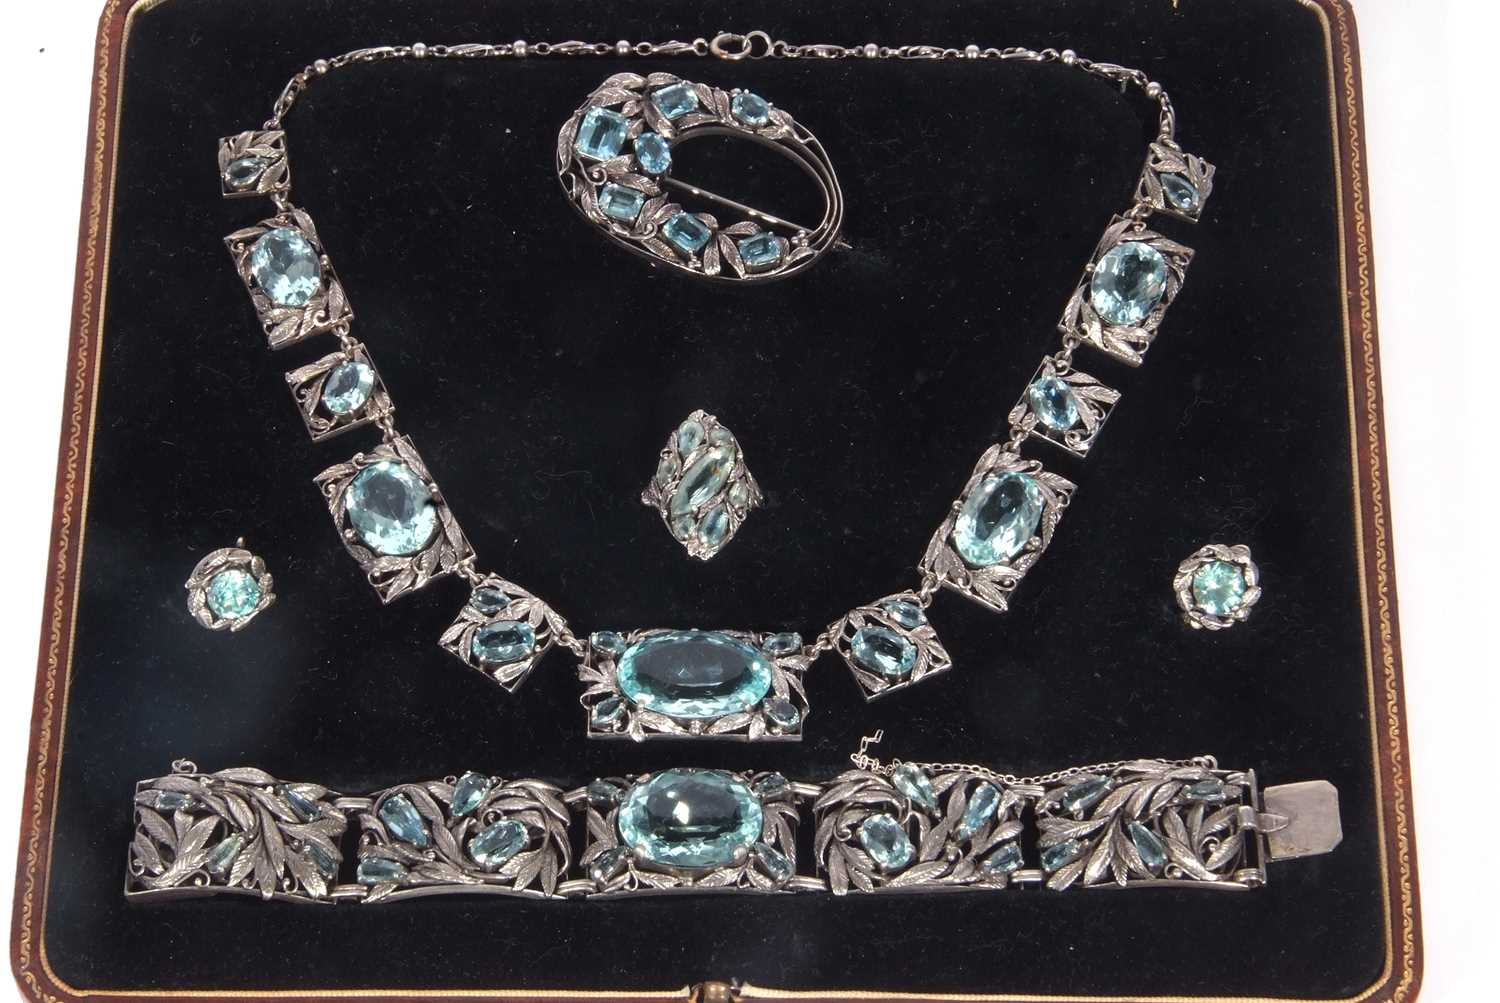 Attributed to Sybil Dunlop, Arts & Crafts demi-parure to include necklace, an alternate - Image 17 of 29